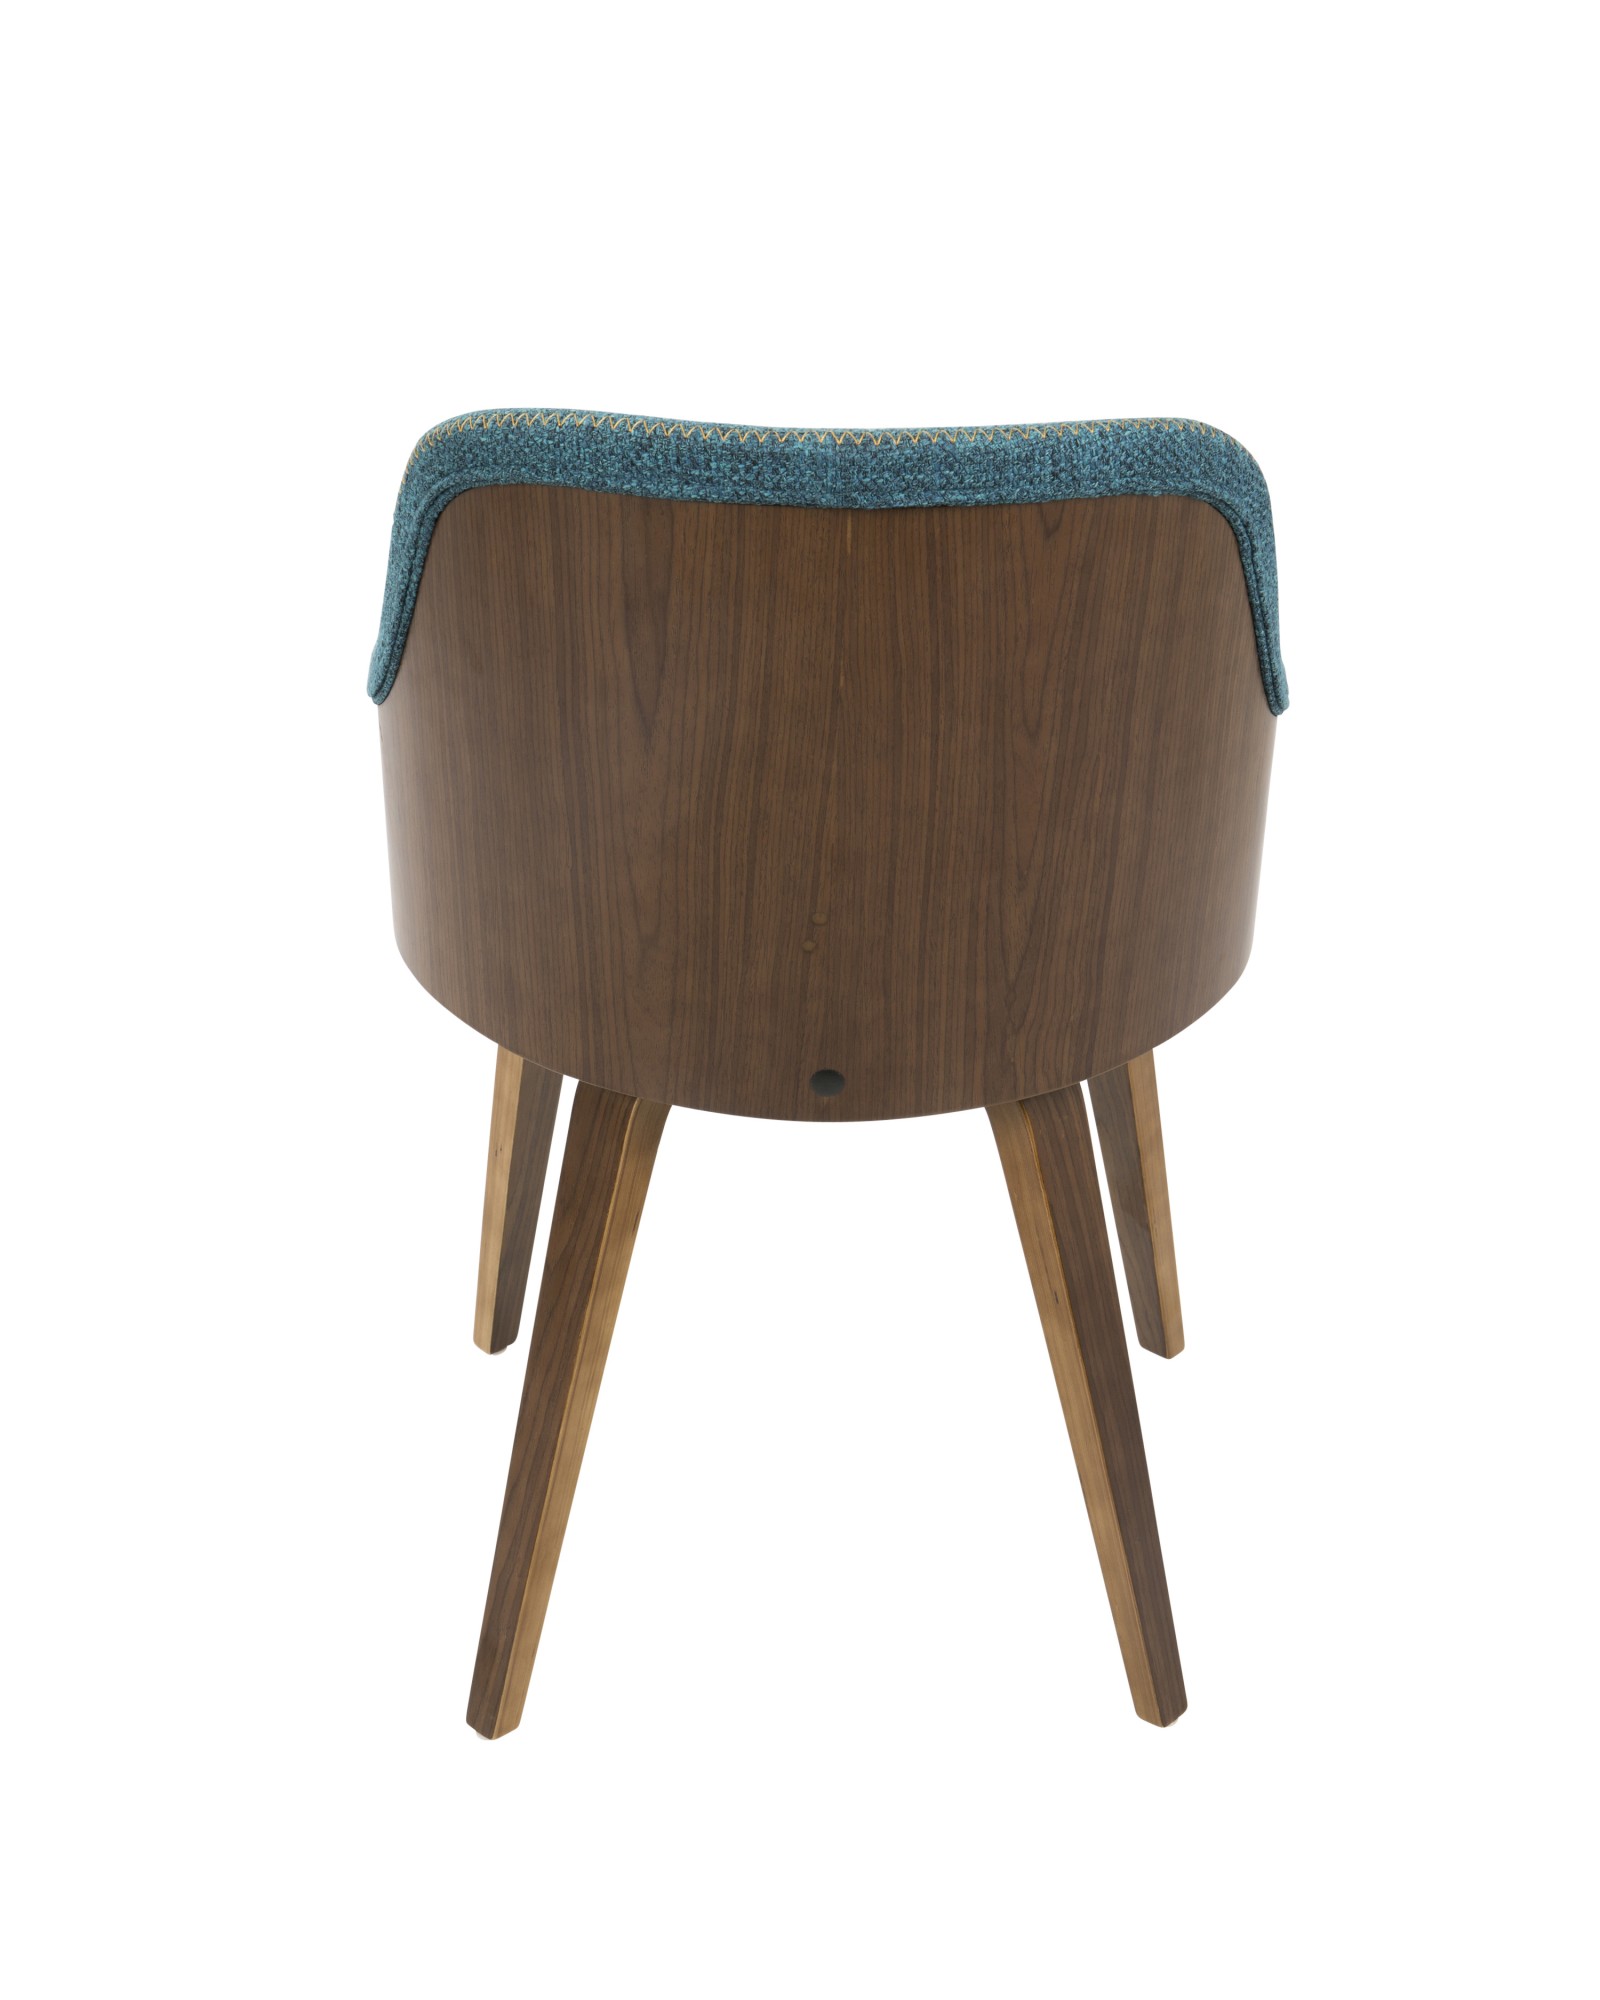 Bacci Mid-Century Modern Dining/ Accent Chair in Walnut Wood and Teal Fabric